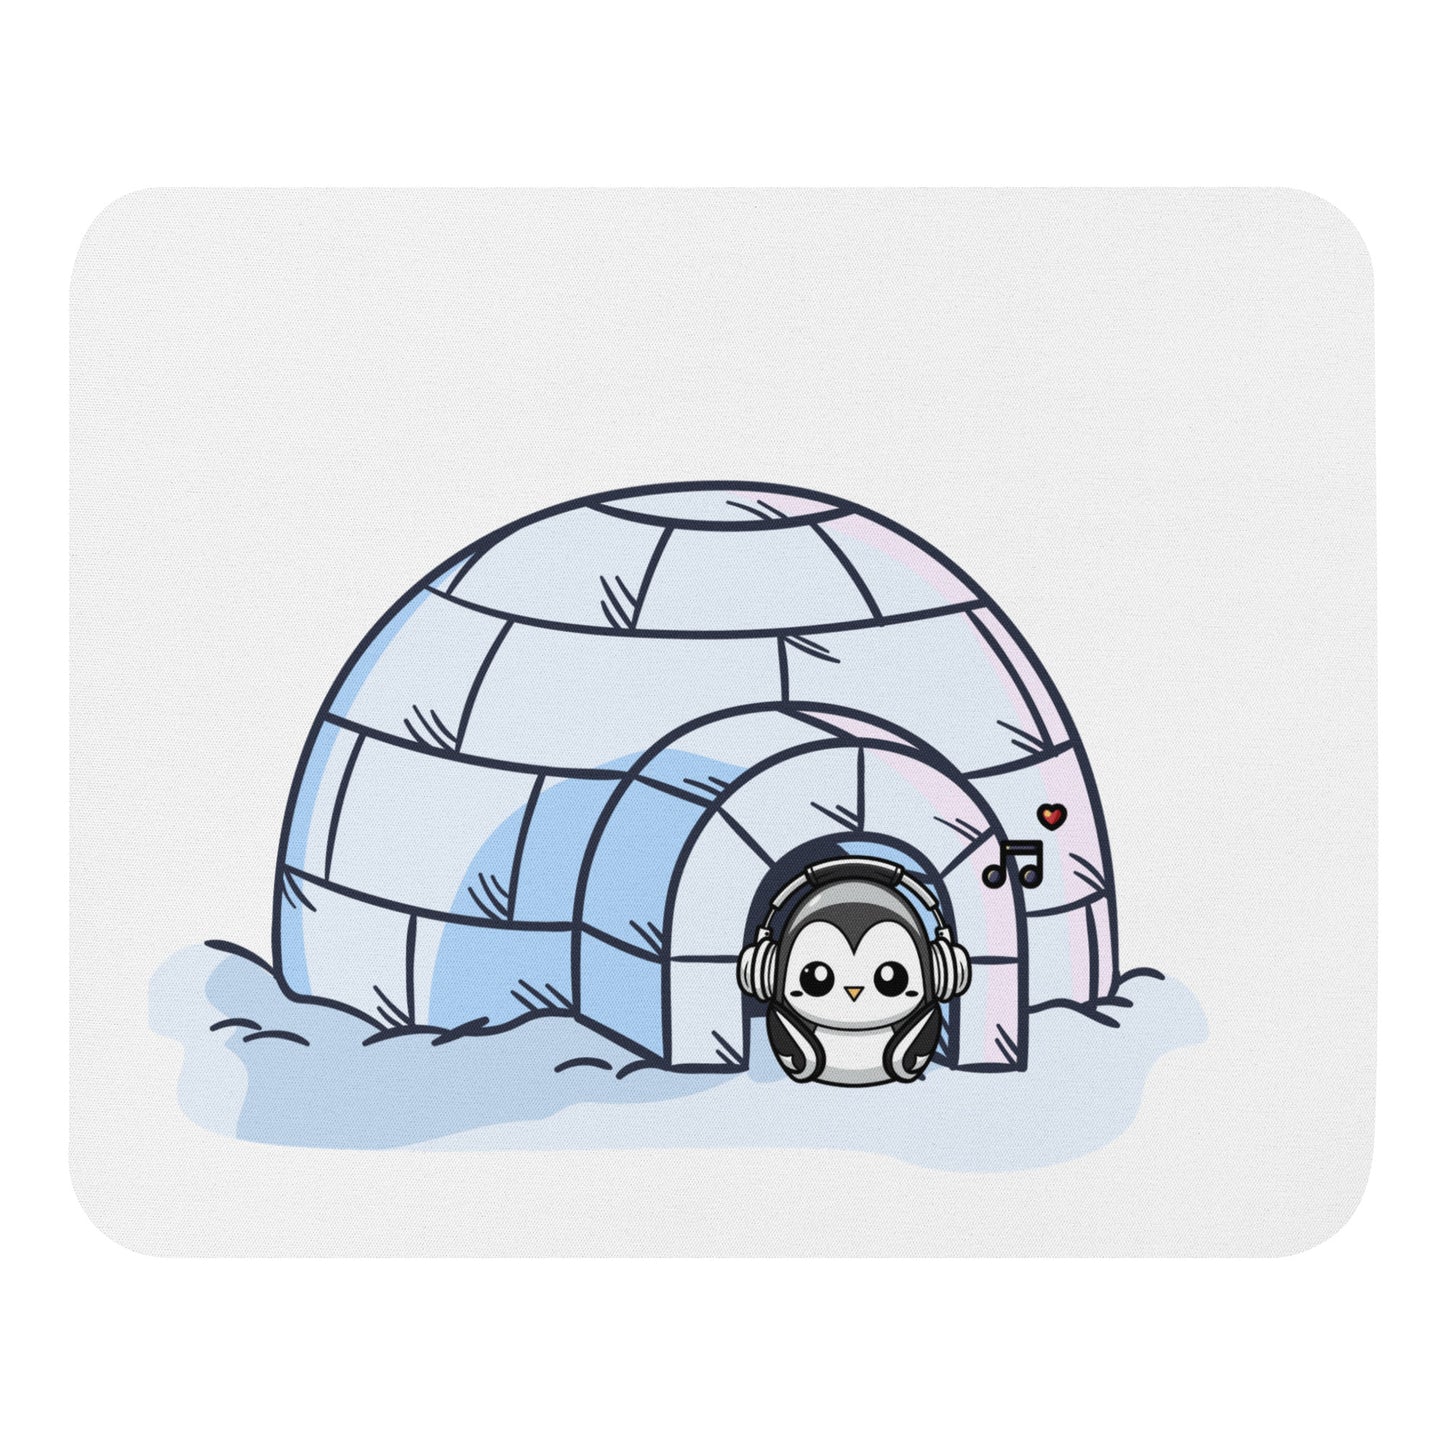 Igloo Pengy Mouse pad